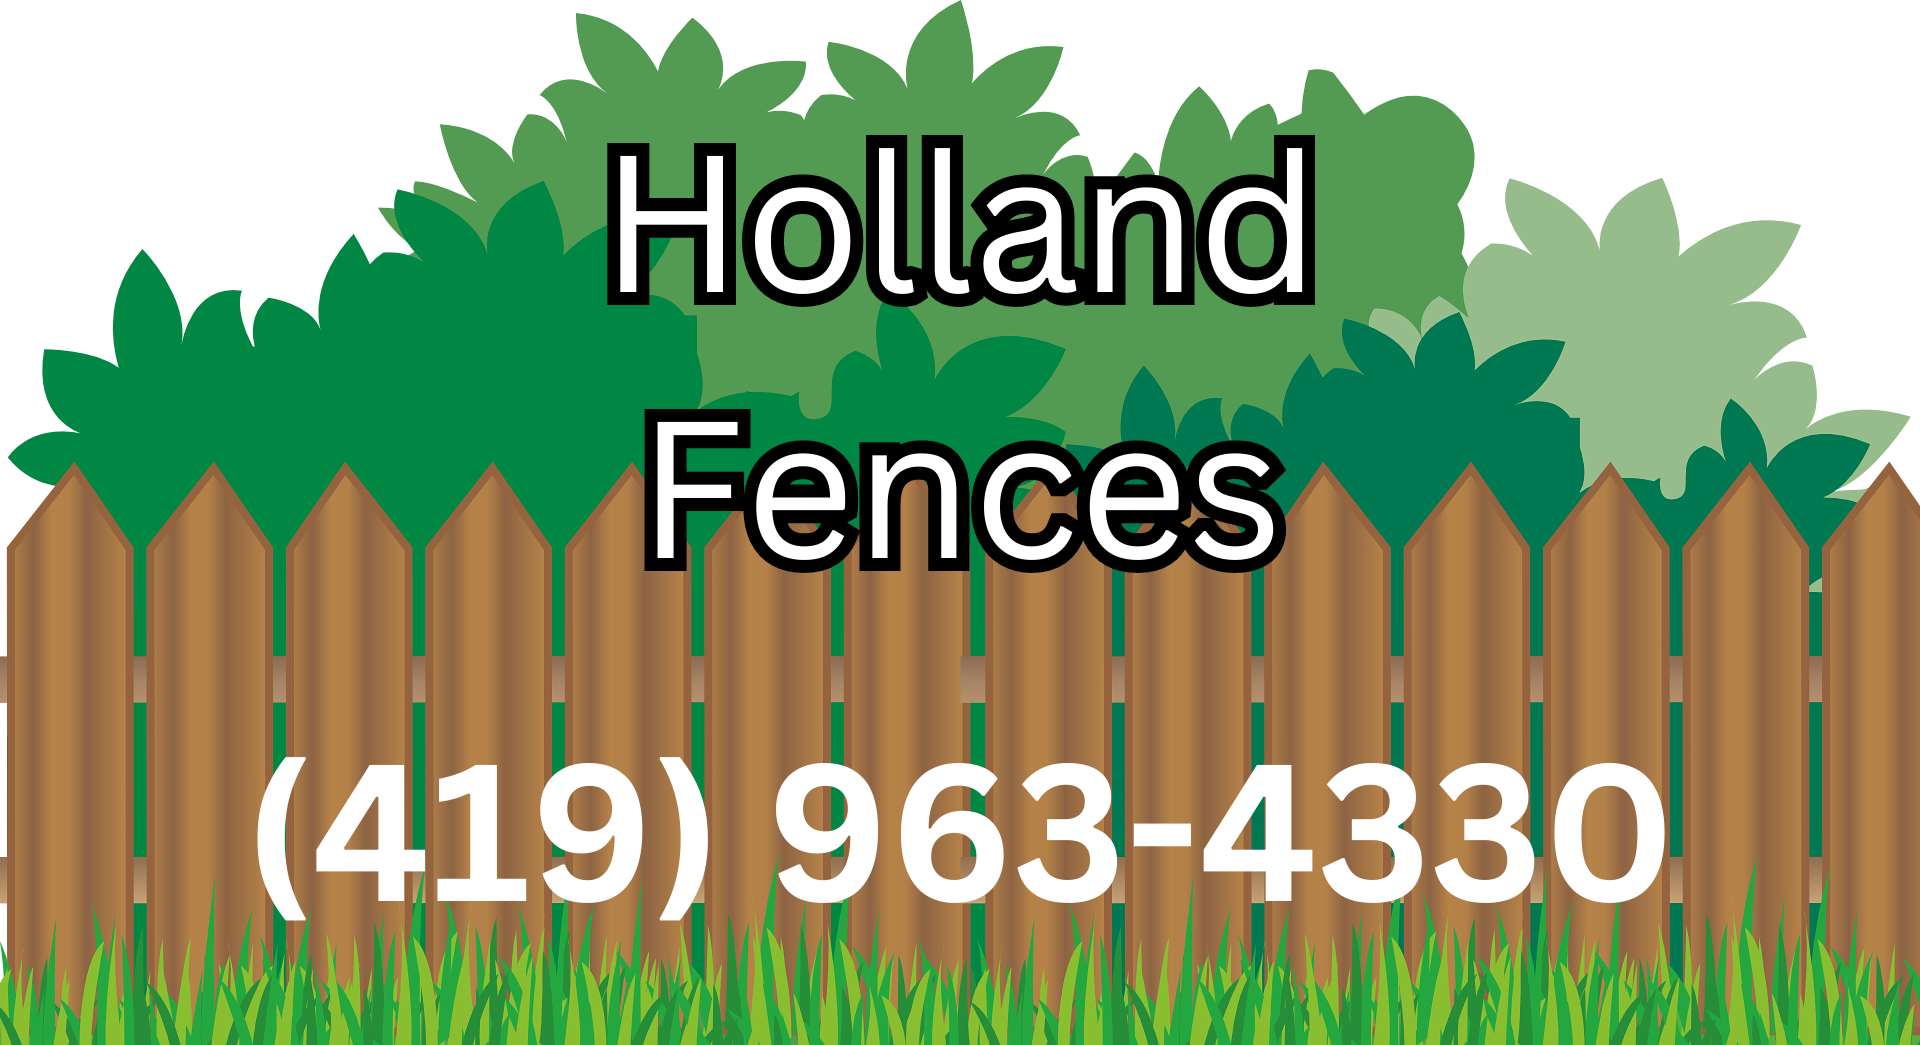 Fence Contractor in Holland